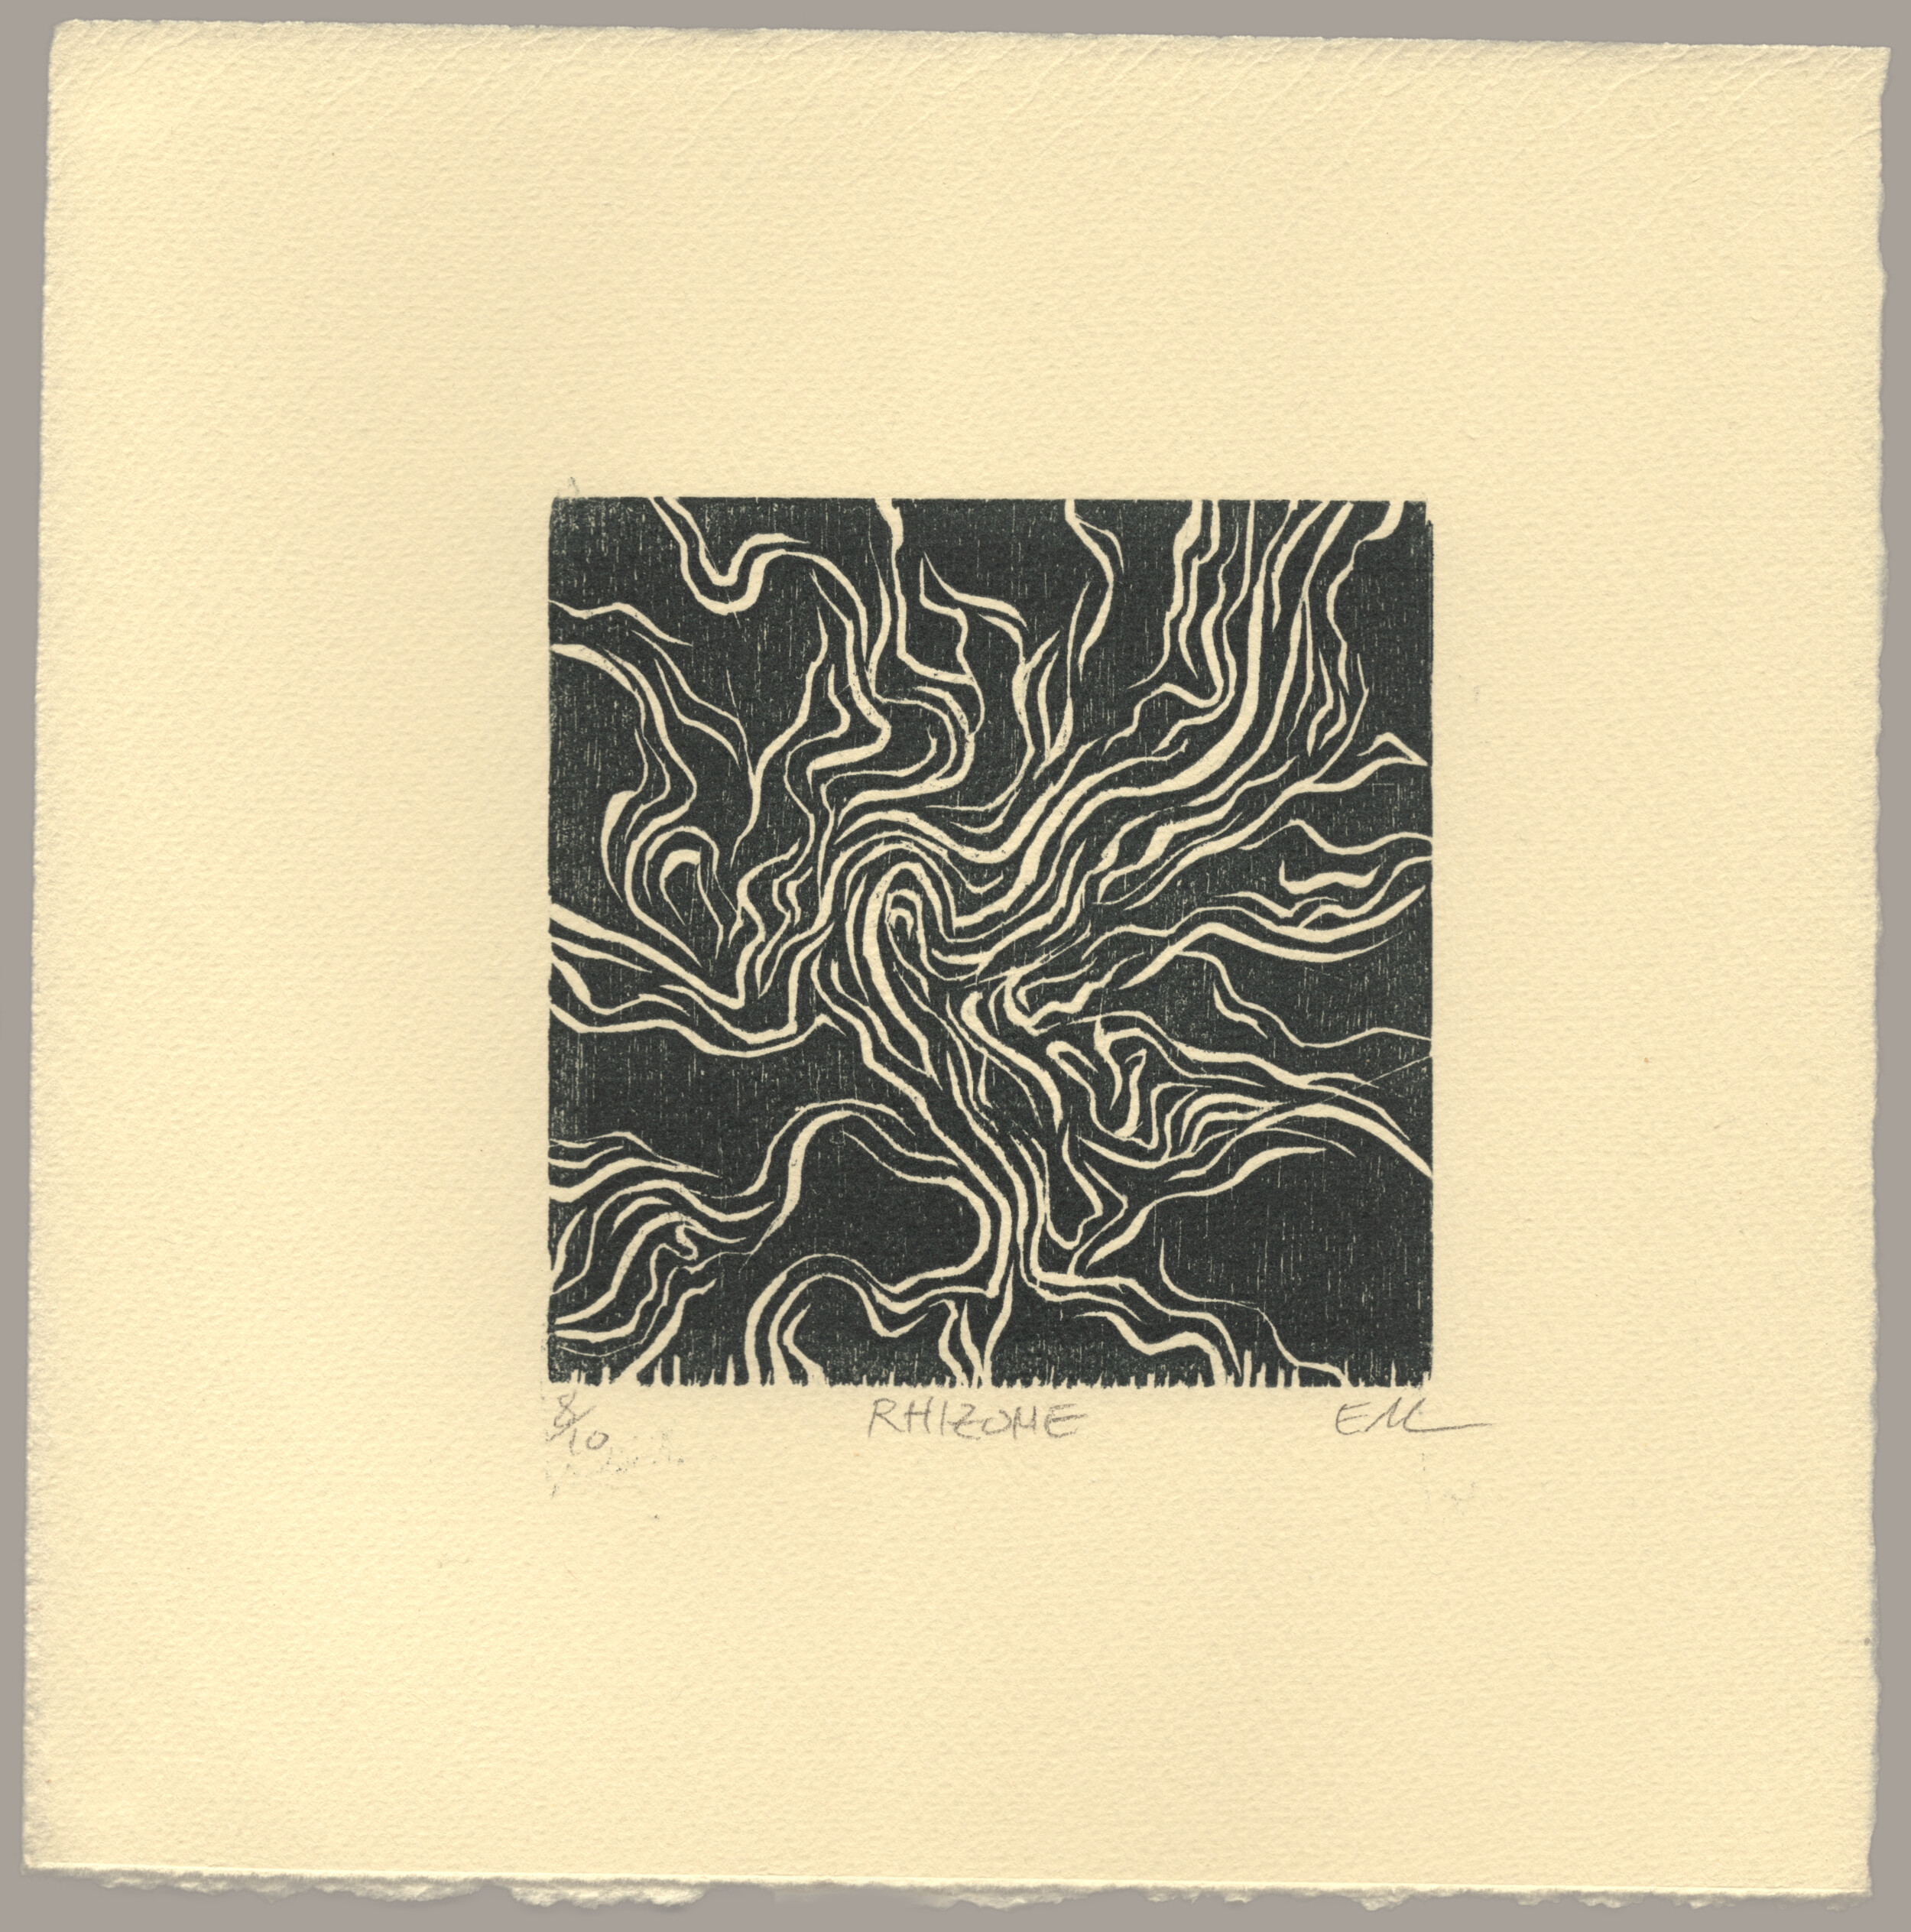 An abstract woodcut print on warm paper consisting of a black square broken up by (negative) white curvy lines which fold over each other, cluster, and diverge. The center of the pattern is tightly packed like a fingerprint, and as it spreads out it resembles ripples in a stream, folds of fabric, or bark beetle tracks. The print is signed: '8 of 10, Rhizome, EM'